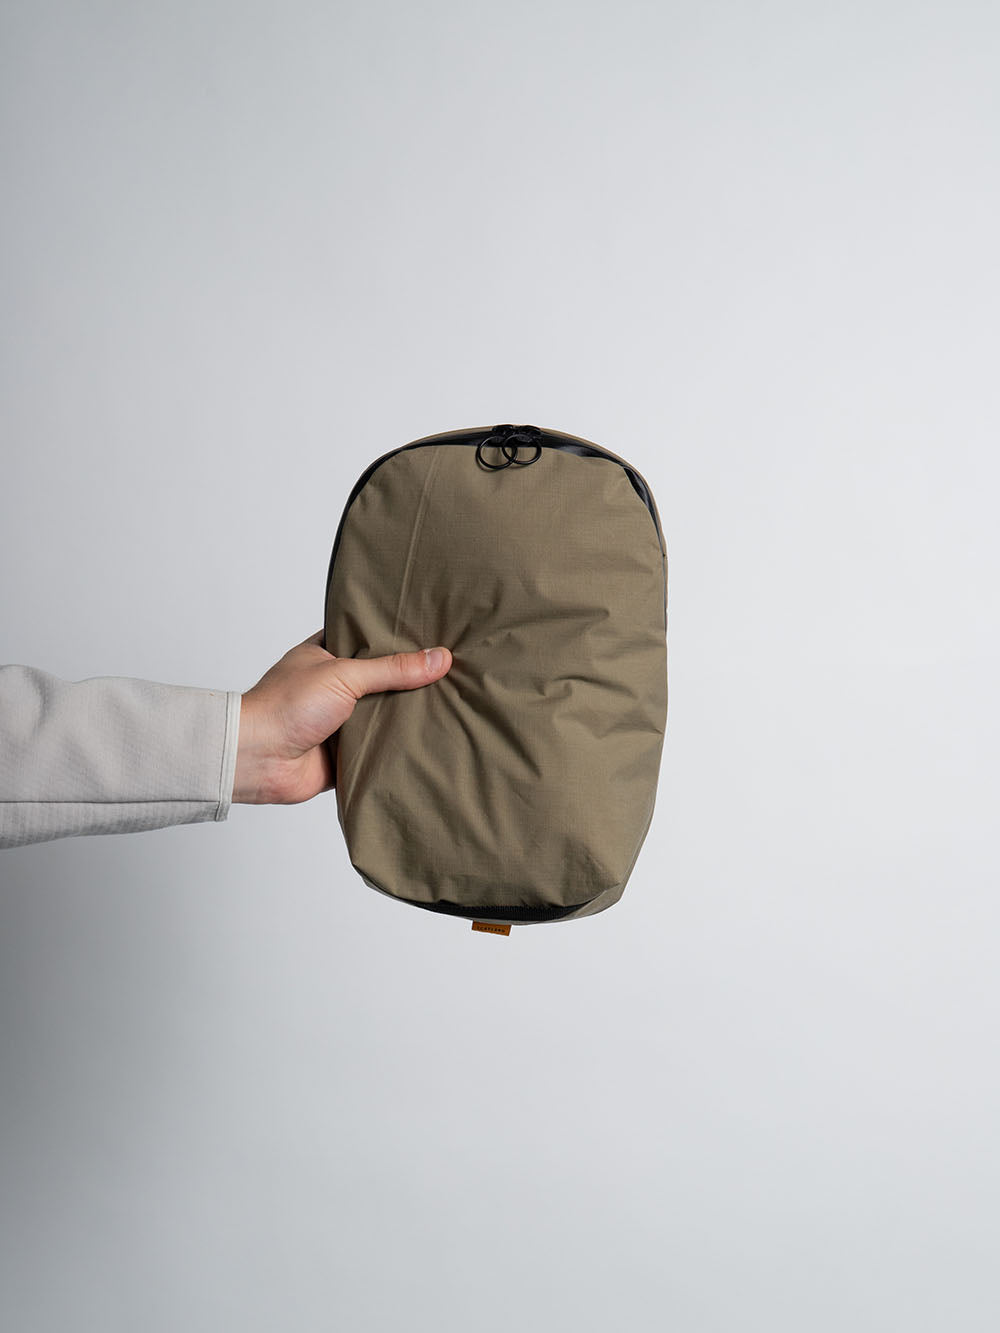 Foulden Clamshell Packing Cubes | Ripstop Edition